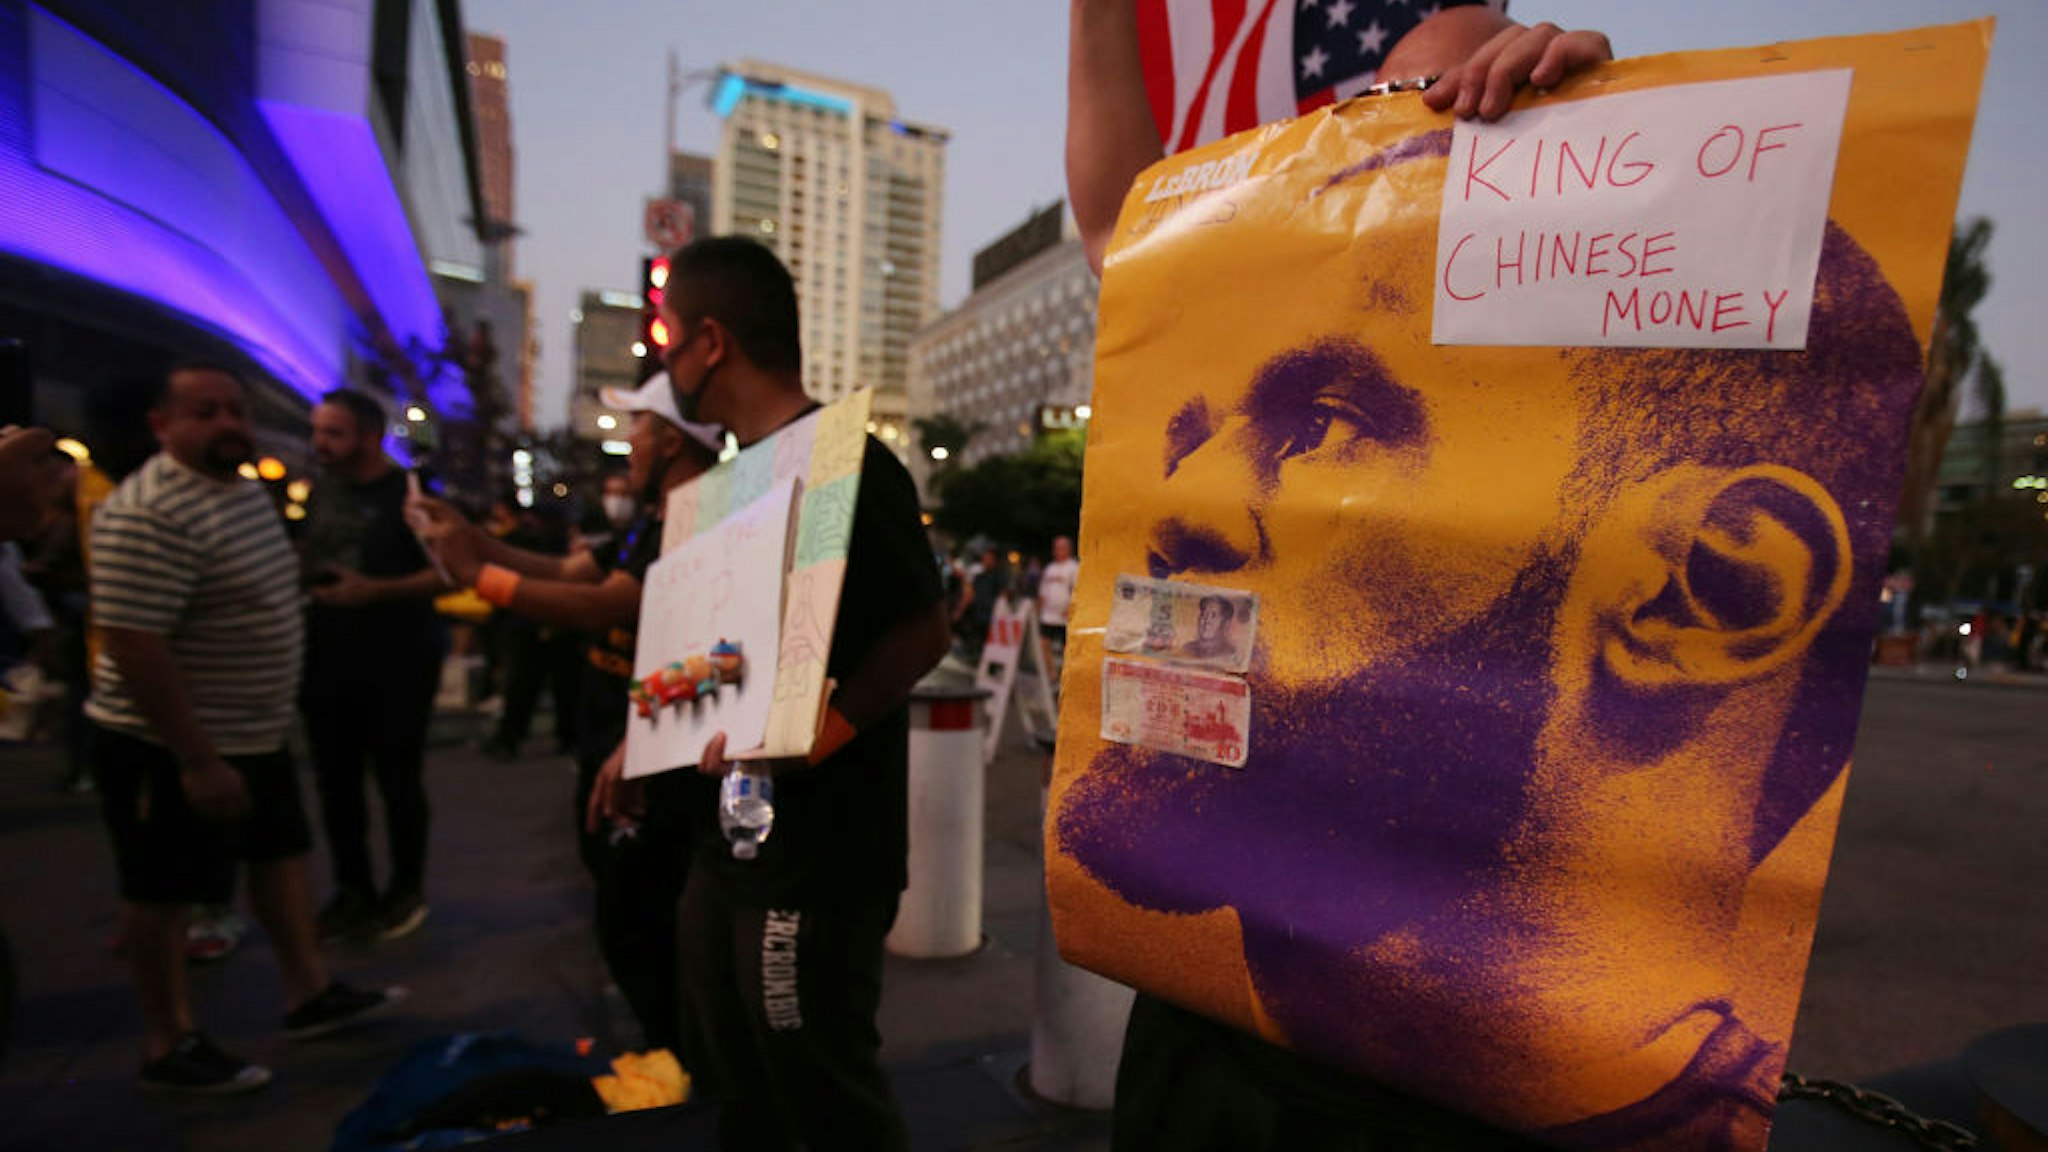 A pro-Hong Kong activist holds a poster of LeBron James with the words 'King of Chinese Money' before the Los Angeles Lakers season opening game against the LA Clippers outside Staples Center on October 22, 2019 in Los Angeles, California. Activists also printed at least 10,000 pro-Hong Kong t-shirts to hand out to those attending the game and encouraged them to wear the free shirts as a form of peaceful protest against China amidst Chinese censorship of NBA games. (Photo by Mario Tama/Getty Images)